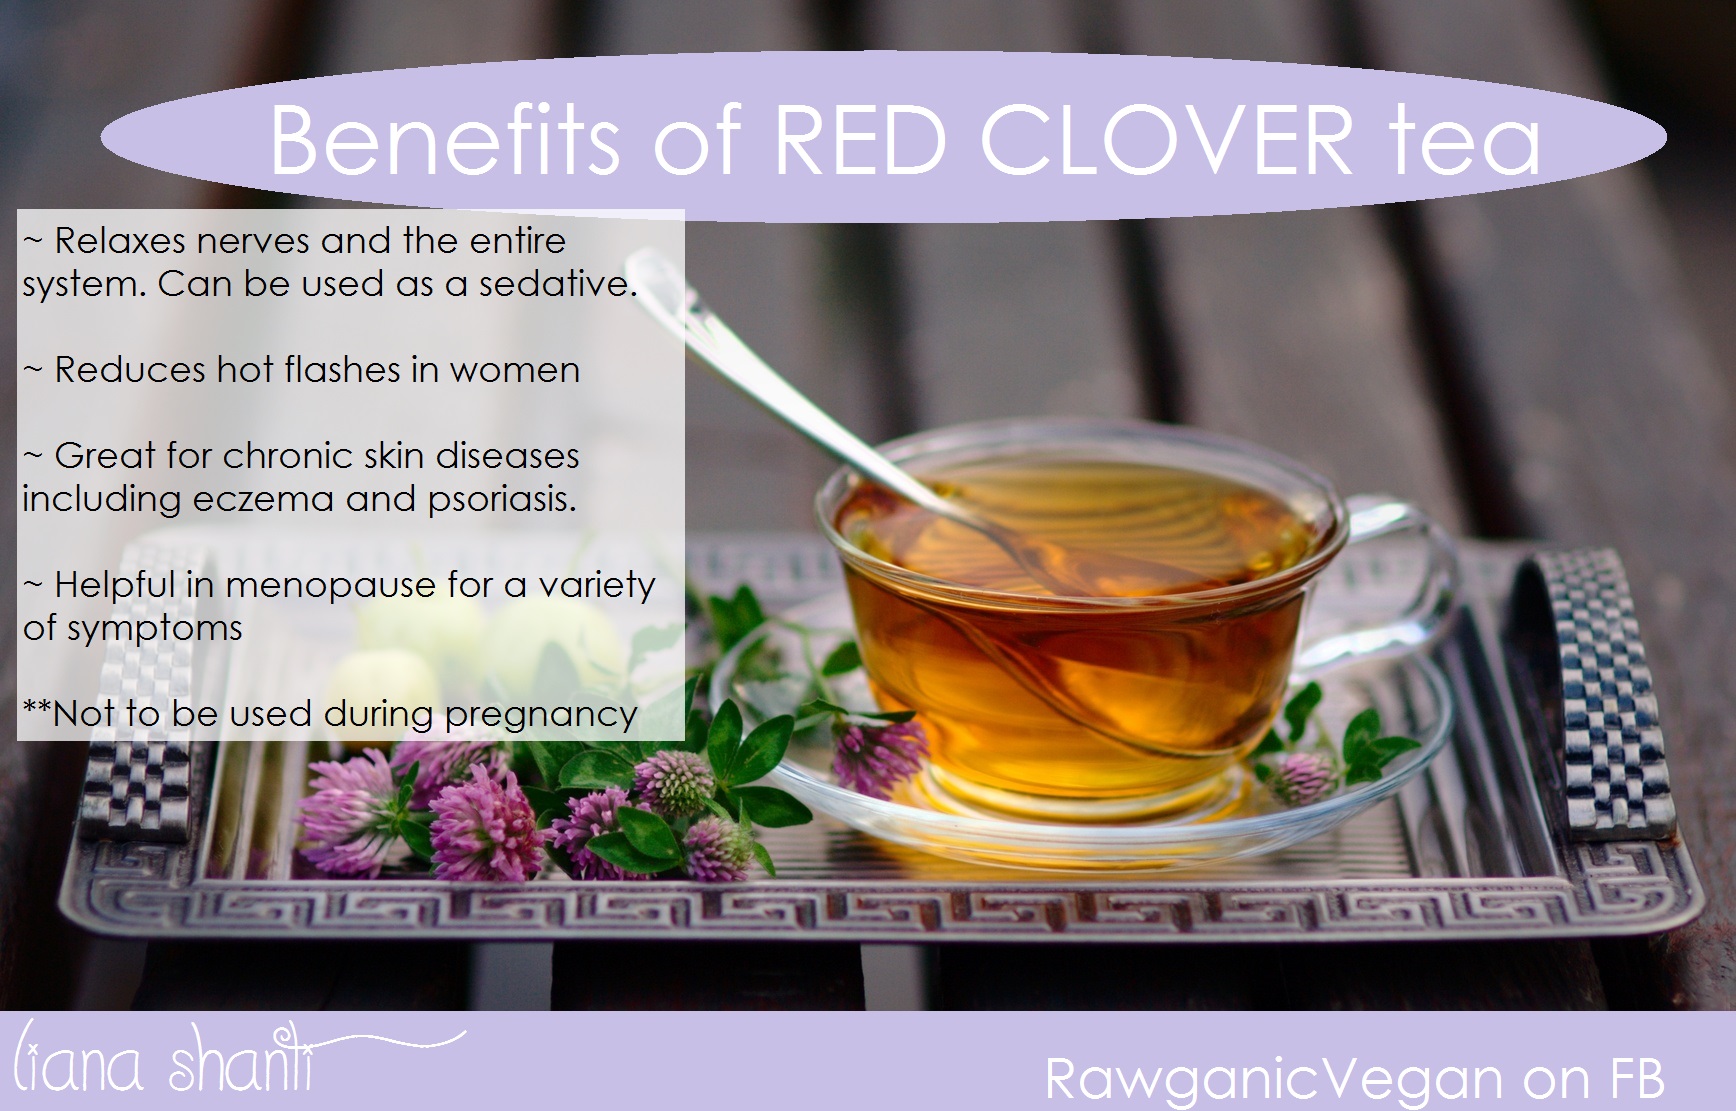 RED CLOVER FOR PMS, HEART HEALTH AND MORE